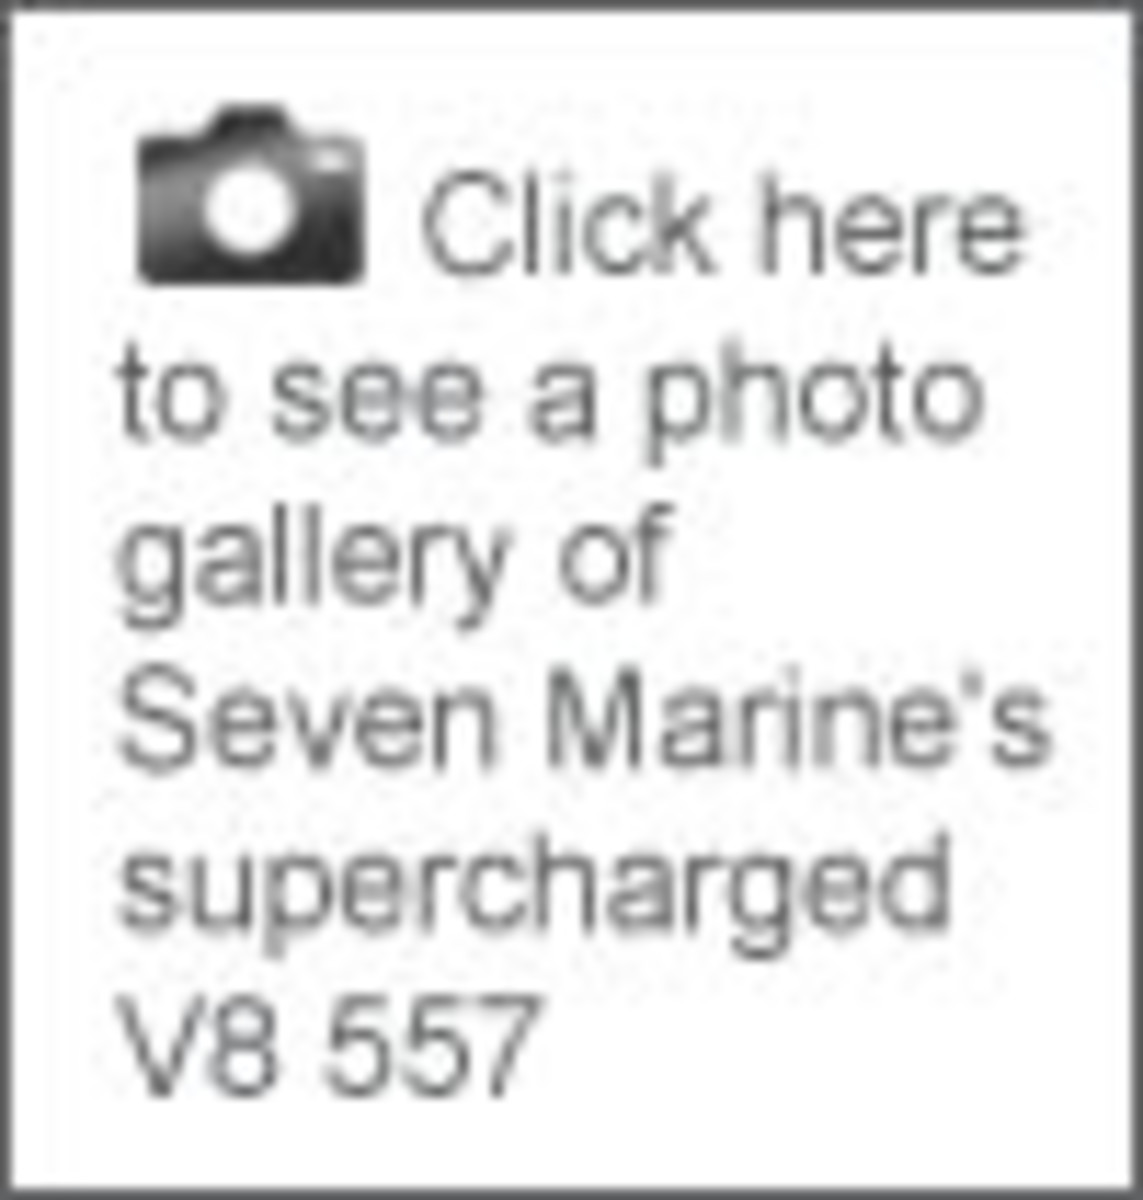 Click here to see a photo gallery of Seven Marine's supercharged V8 557